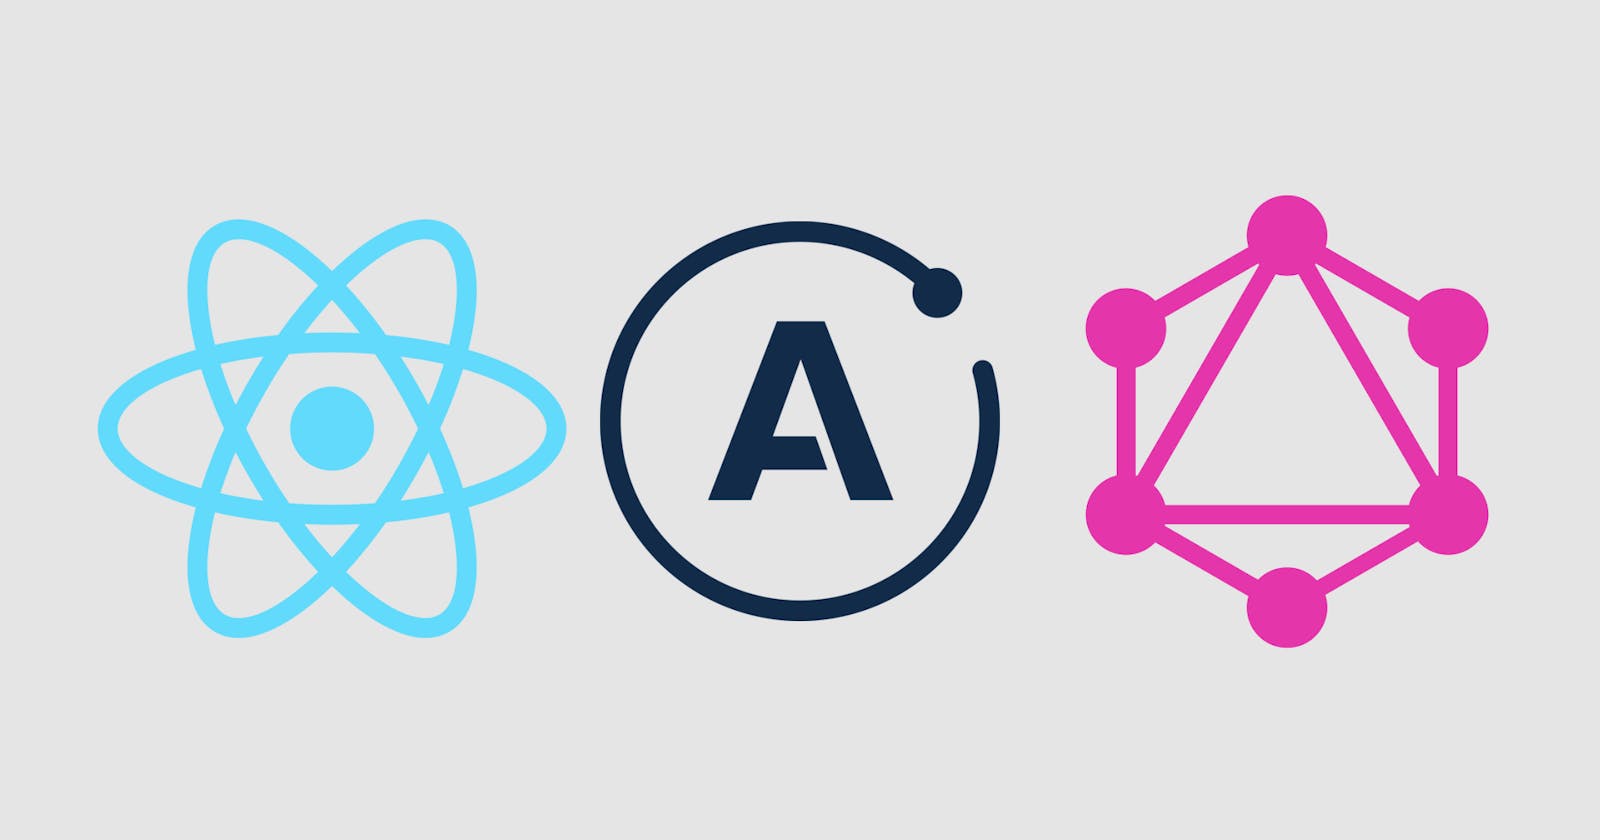 Getting started with React & Apollo Client